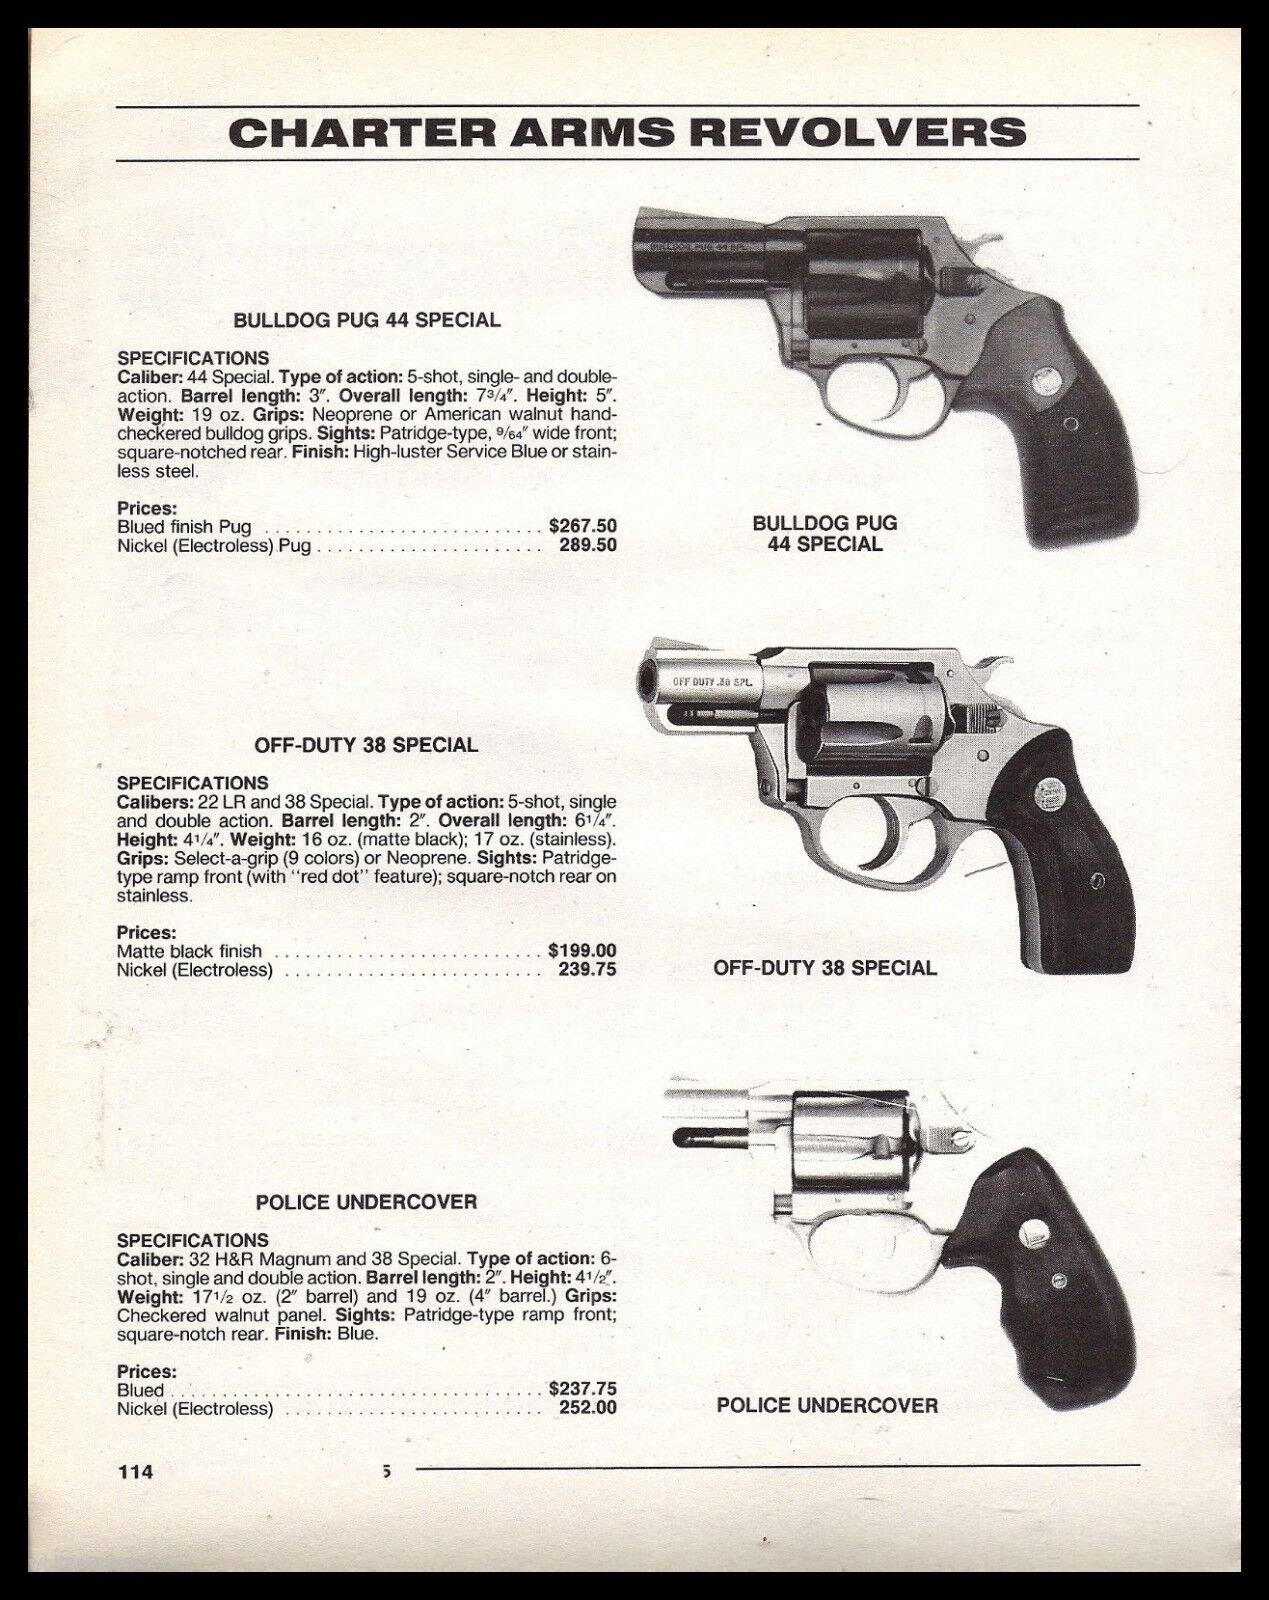 1995 CHARTER ARMS Bulldog Pug 44 Special, Off-Duty .38 Spec Police Undercover AD